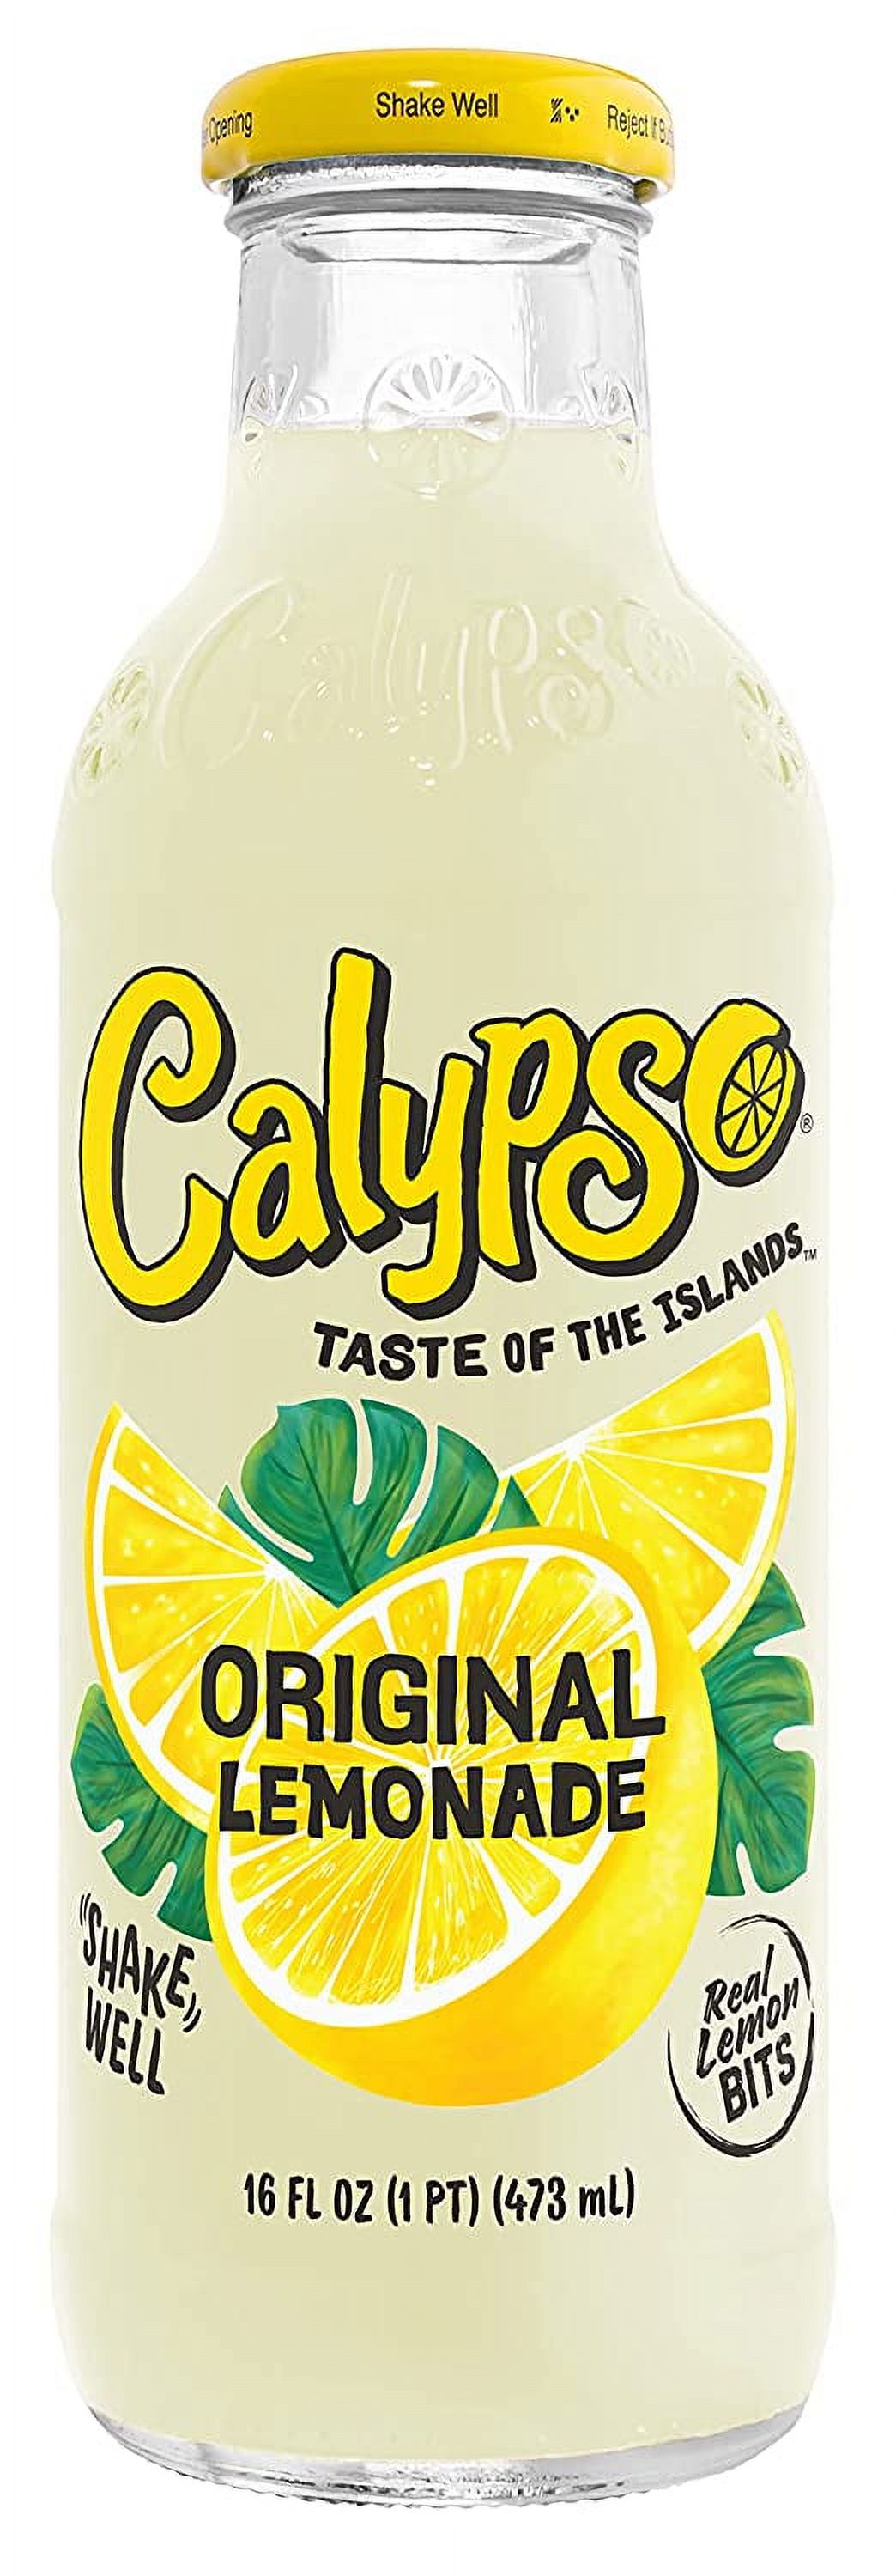 Calypso Lemonade | Made with Real Fruit and Natural Flavors | 6 Flavor Variety, 16 Fl Oz (Pack of 24) - image 4 of 7